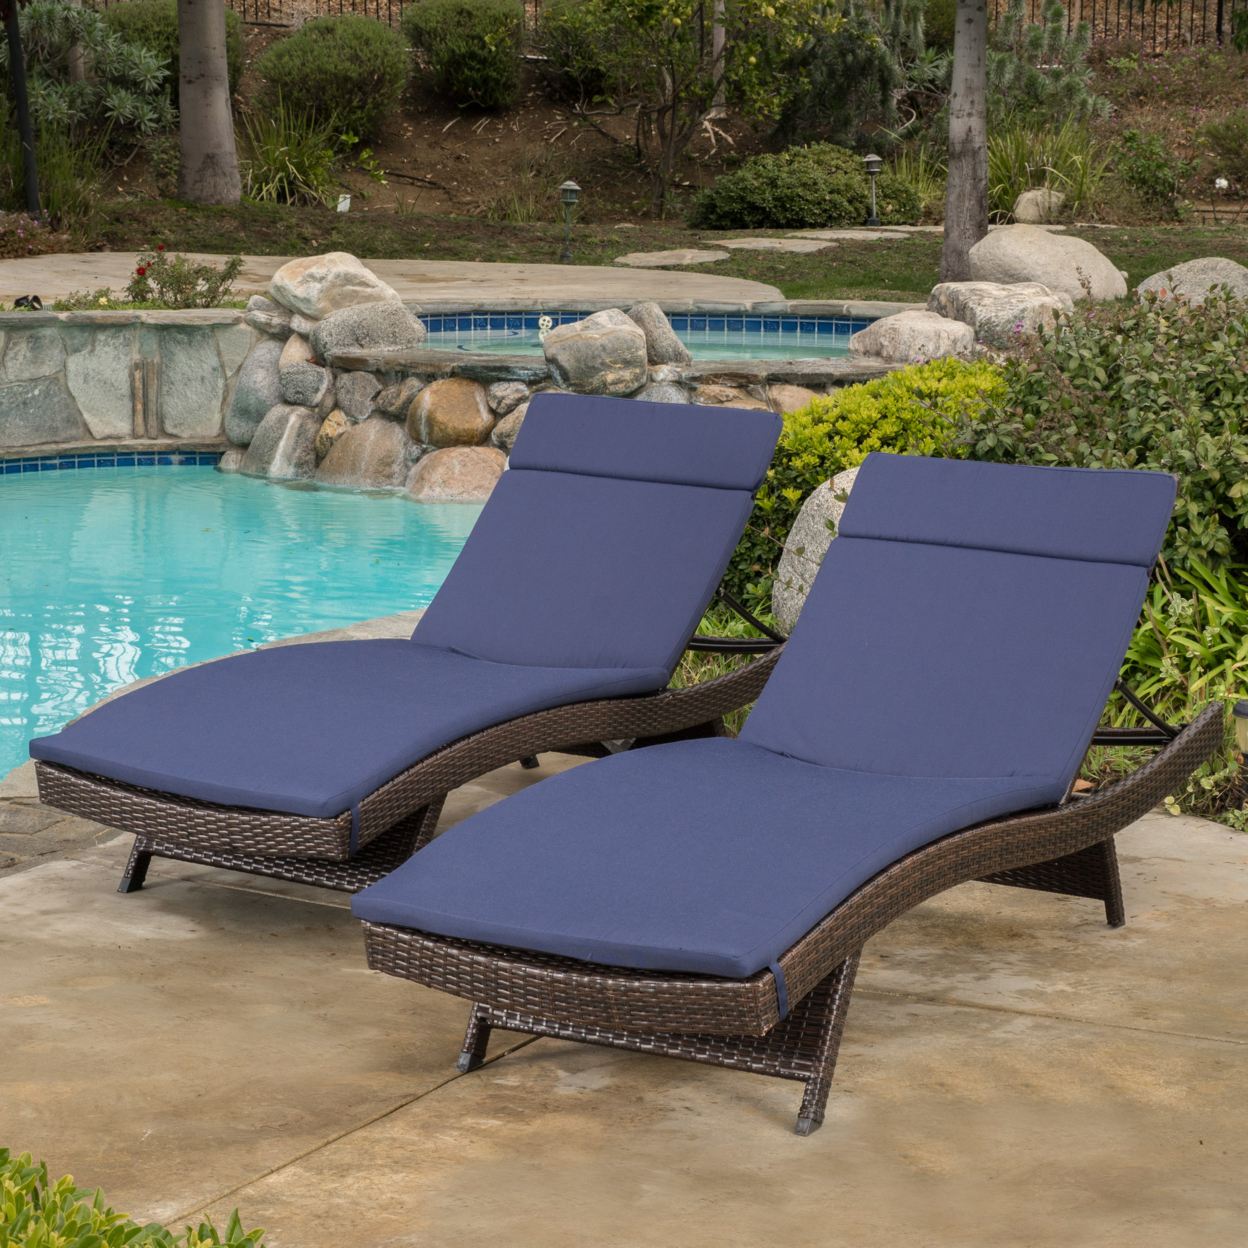 Lakeport Outdoor Adjustable Chaise Lounge Chairs With Cushions (set Of 2) - Caramel Cushion